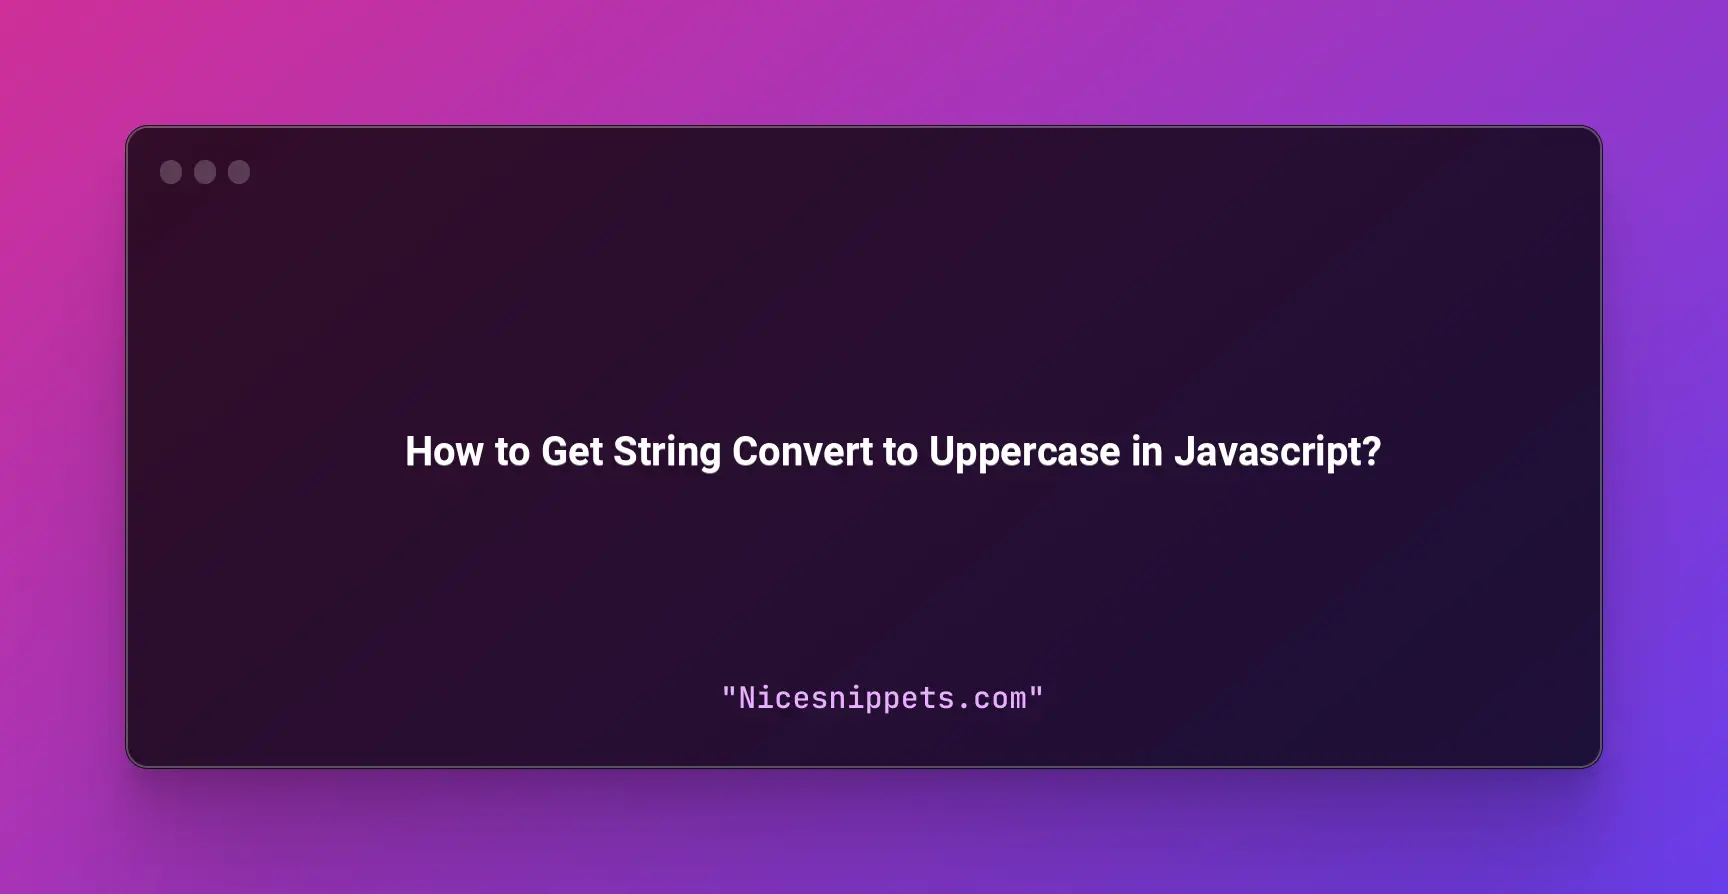 How to Get String Convert to Uppercase in Javascript?